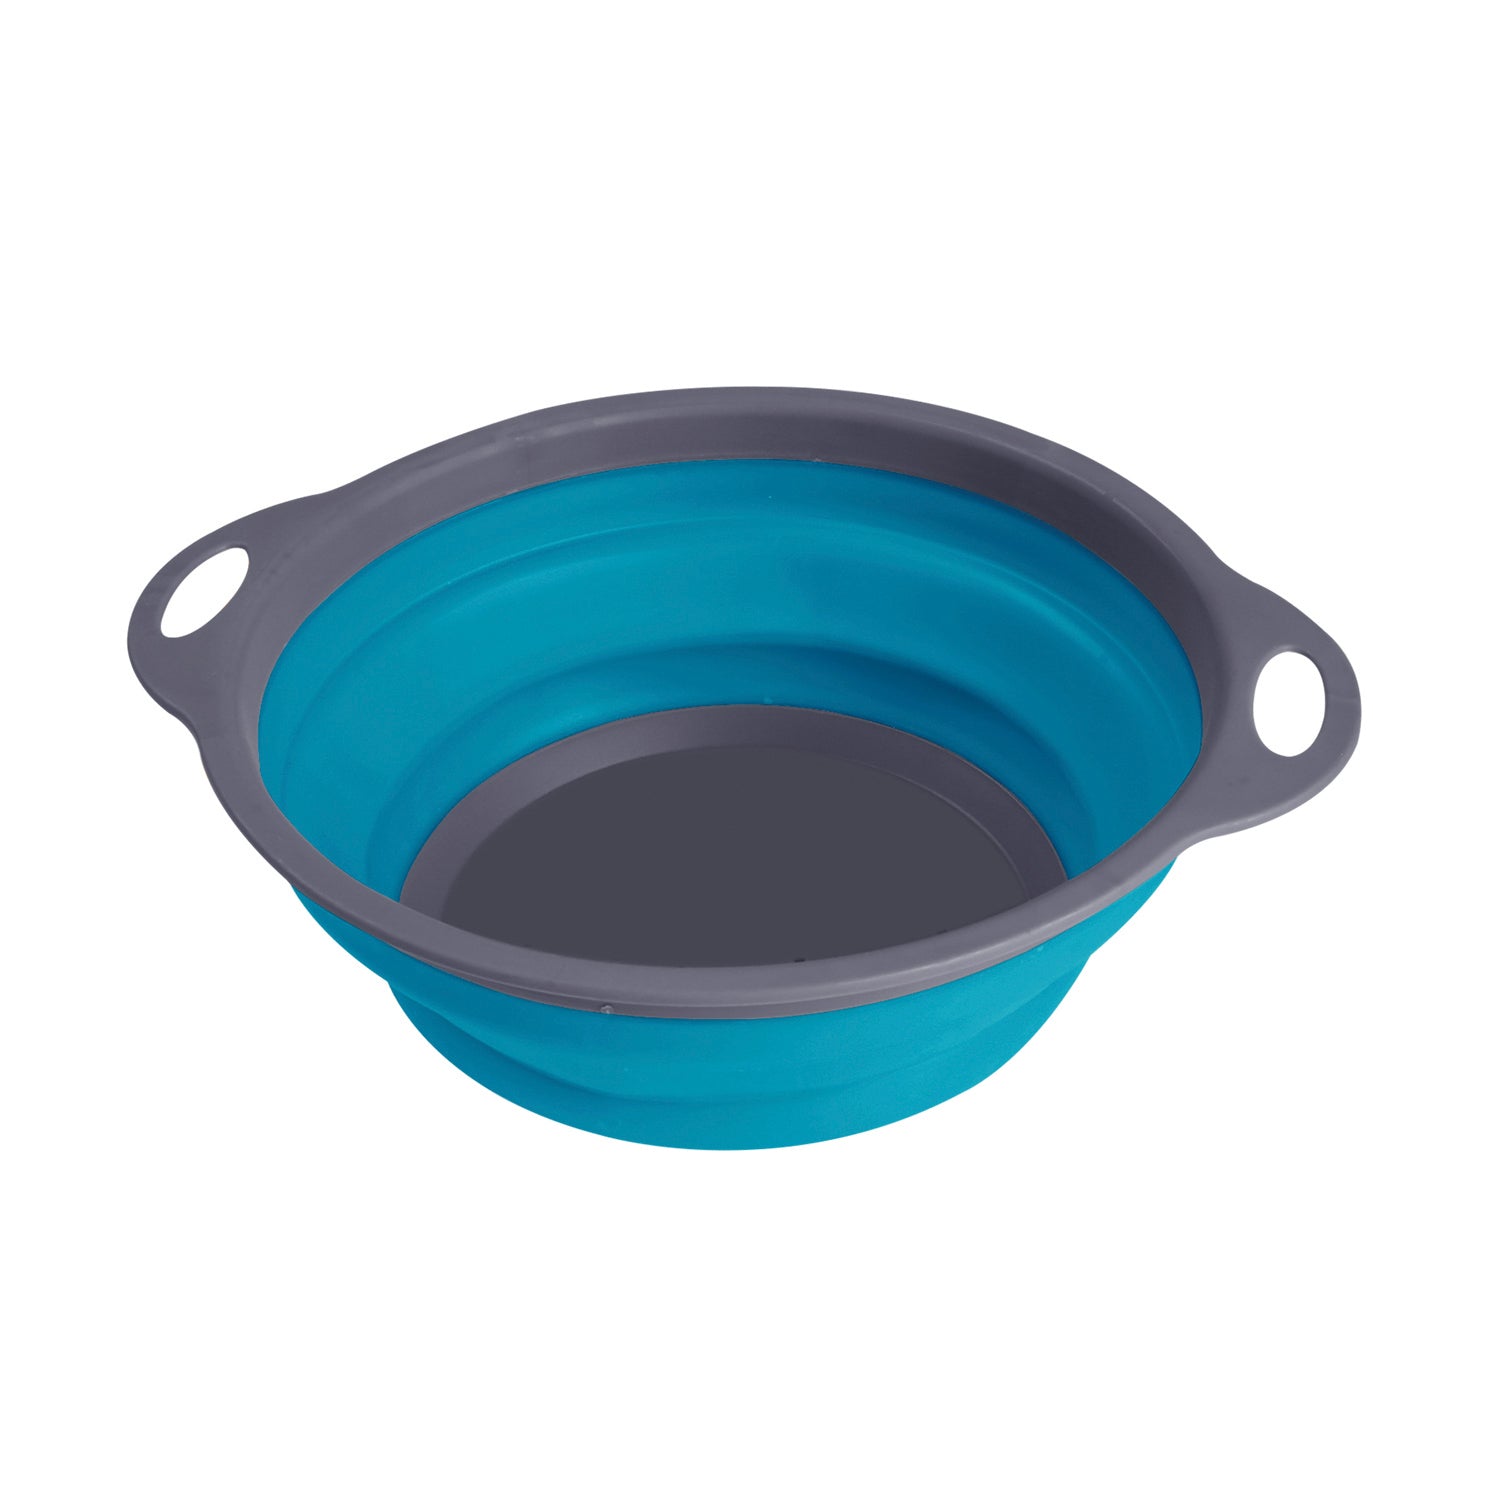 Folding collapsible camp bowl